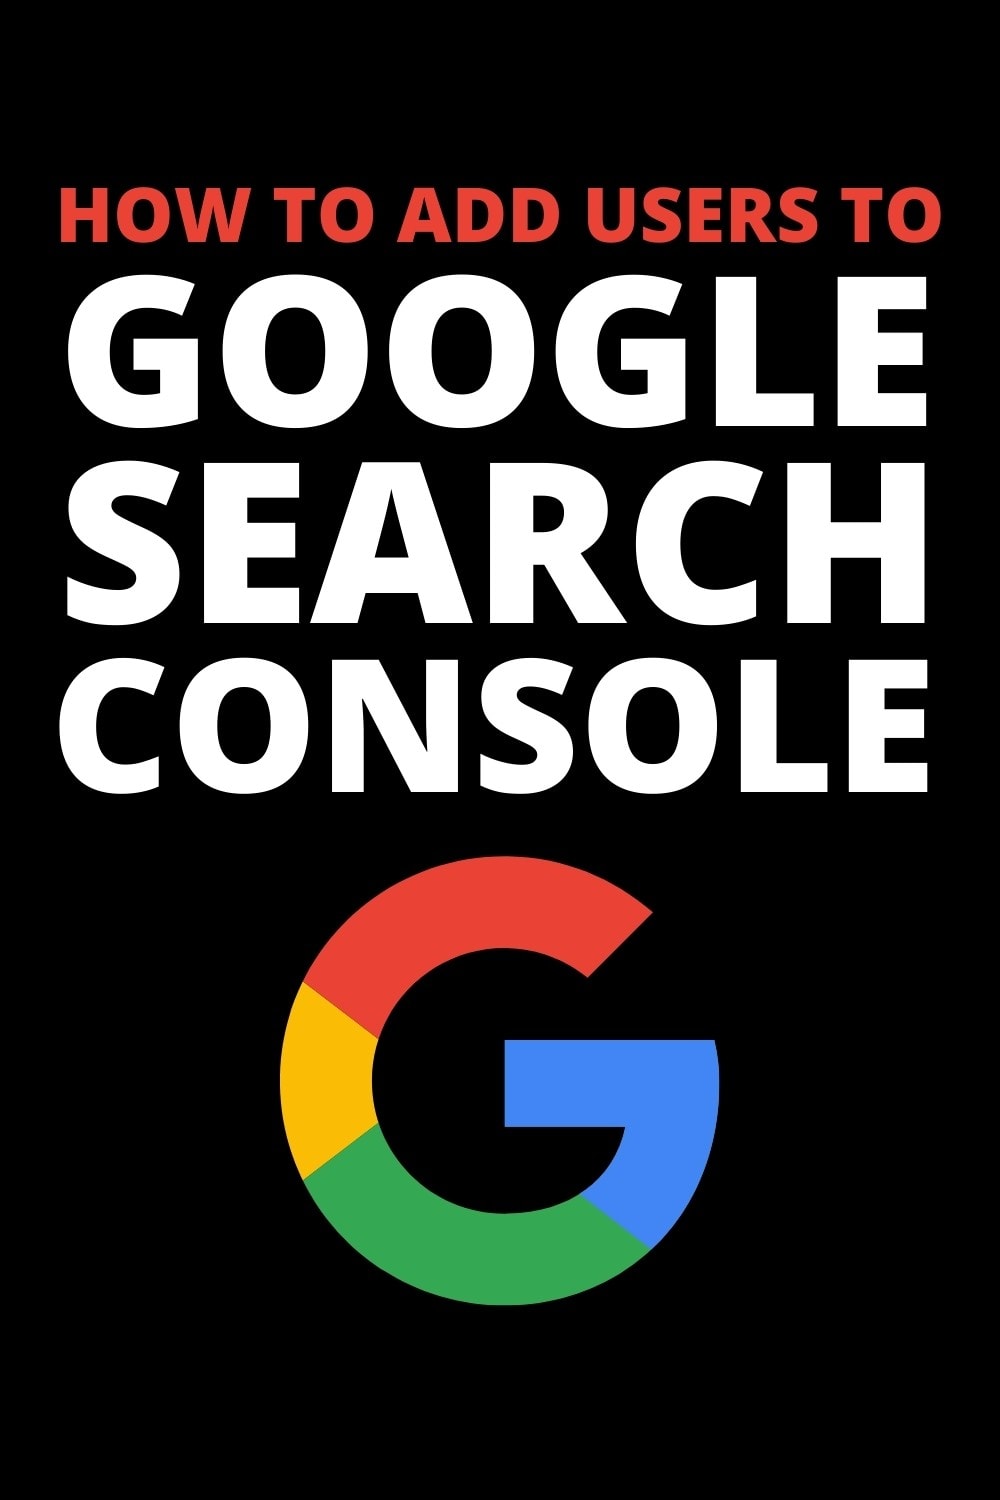 How To Add Users To Google Search Console